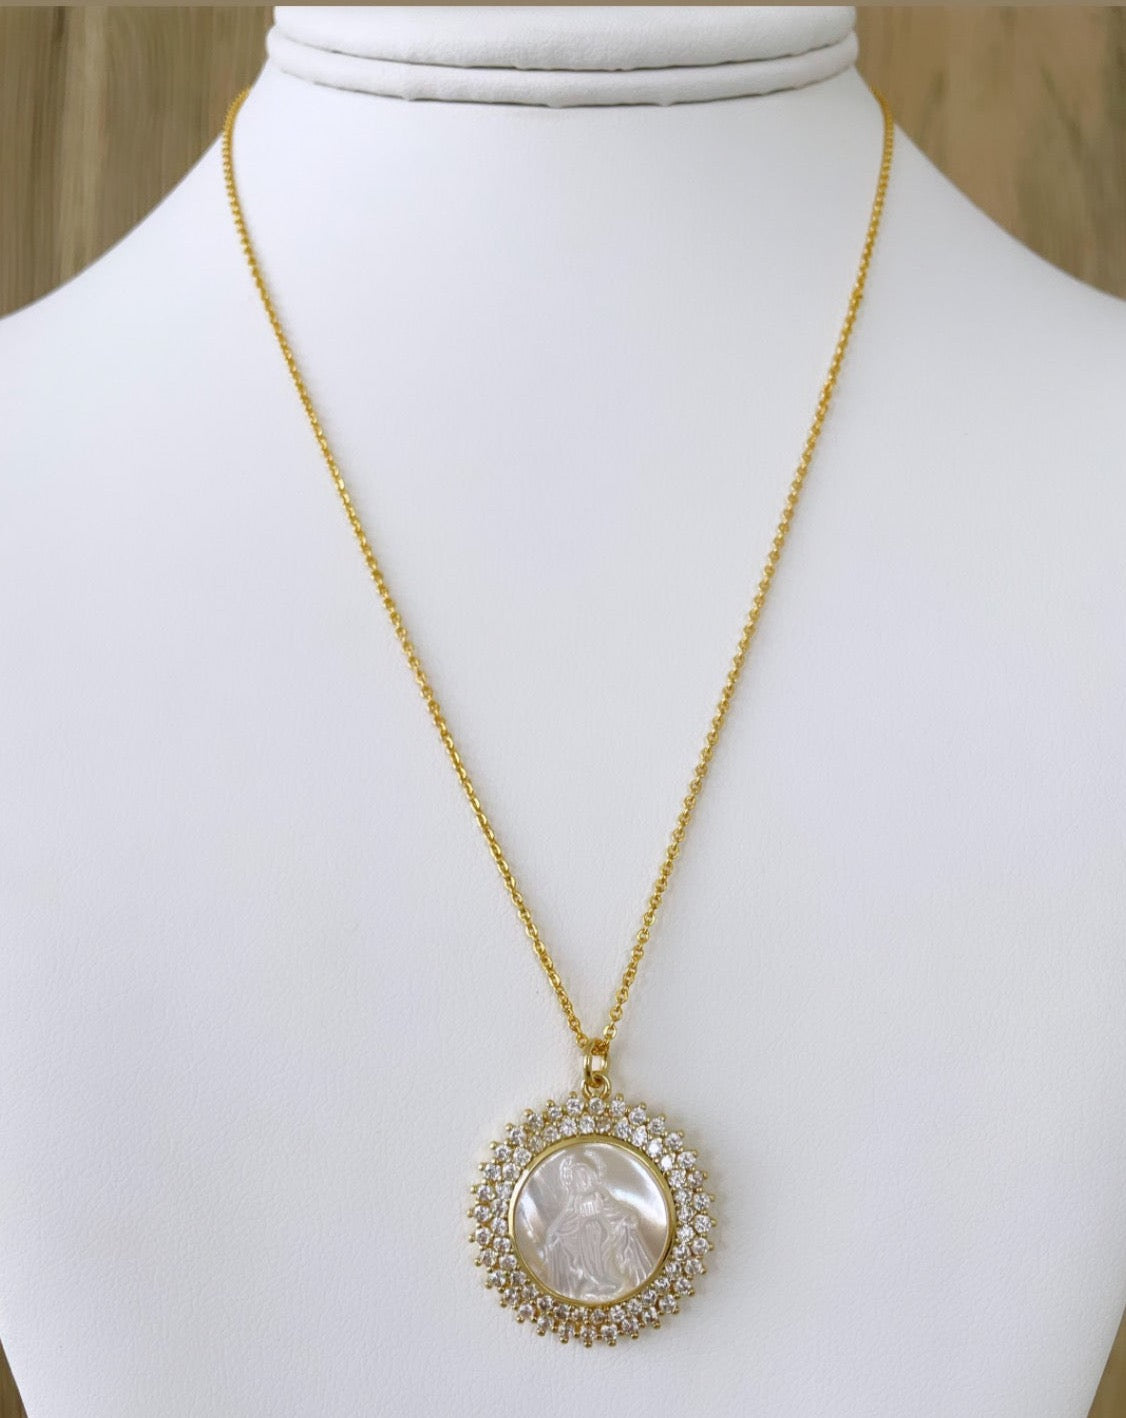 Miracle Virgin Necklace - LimaLimón Store